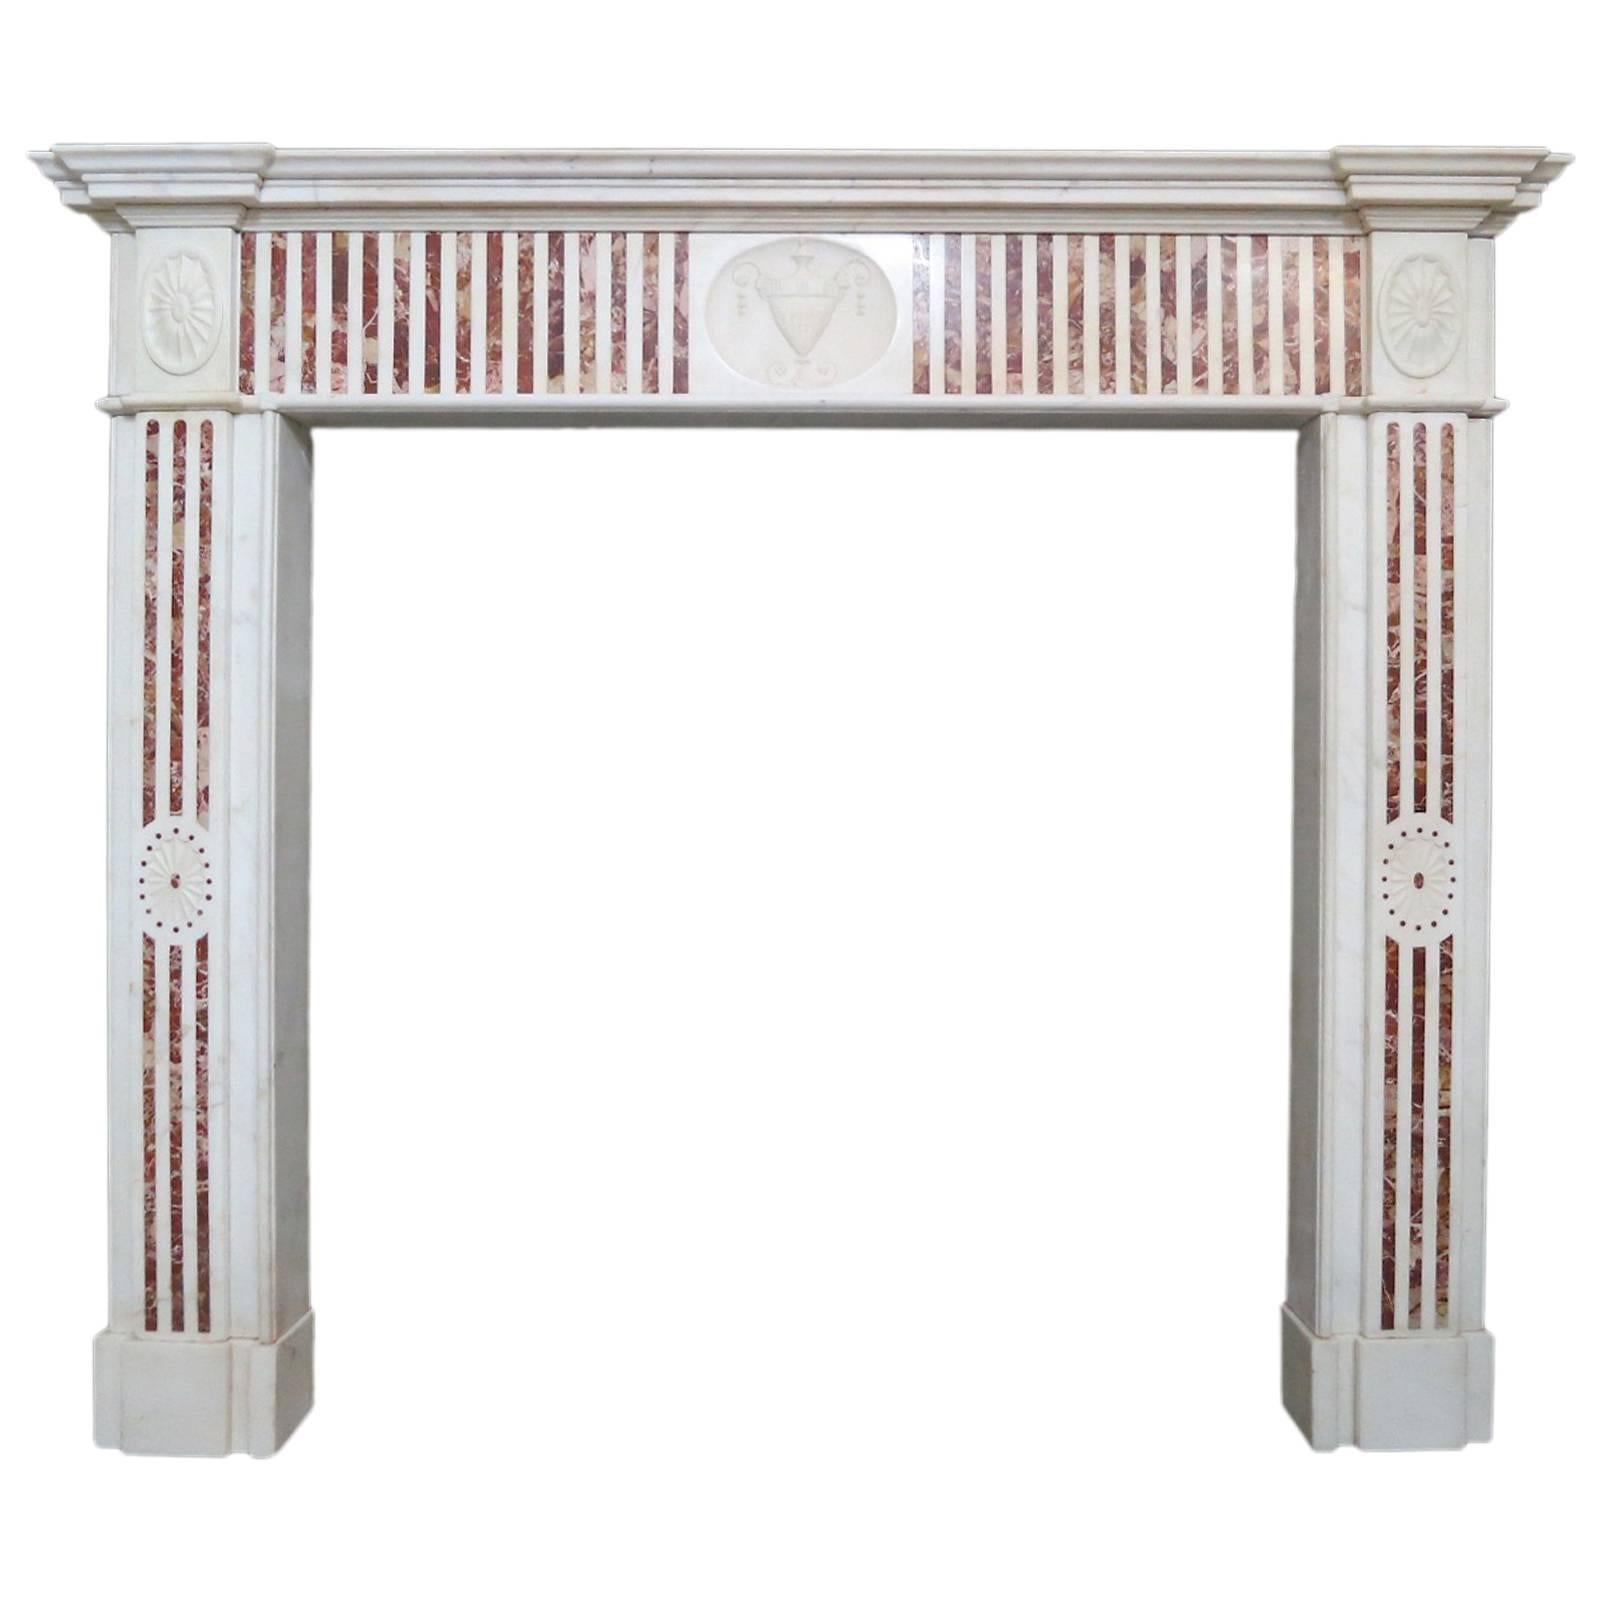 Antique George III Jasper and Statuary Marble Fireplace Mantel 